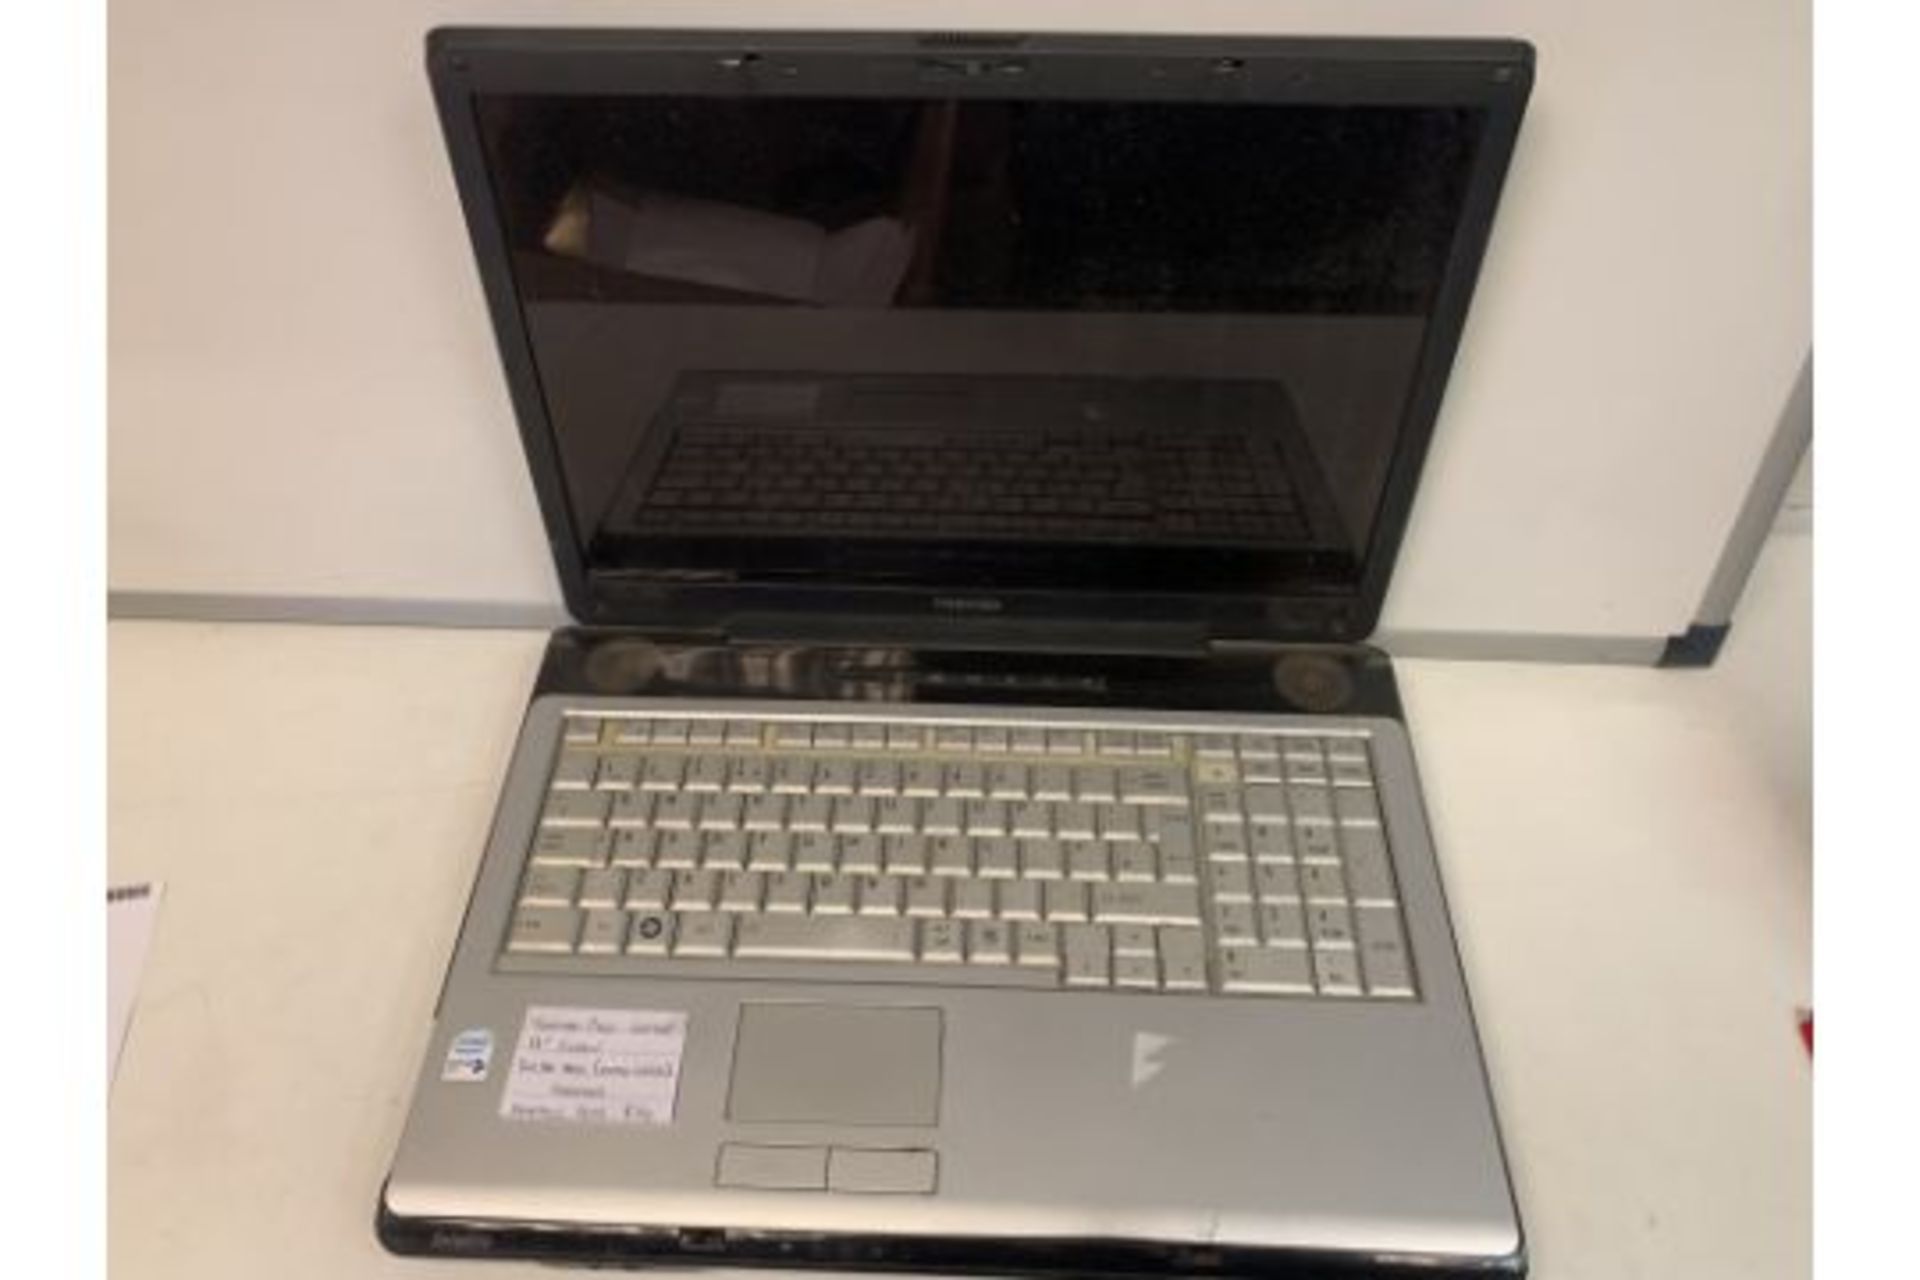 TOSHIBA P200 LAPTOP, 17 INCH SCREEN, 200GB HDD WITH CHARGER (73) (844/3)